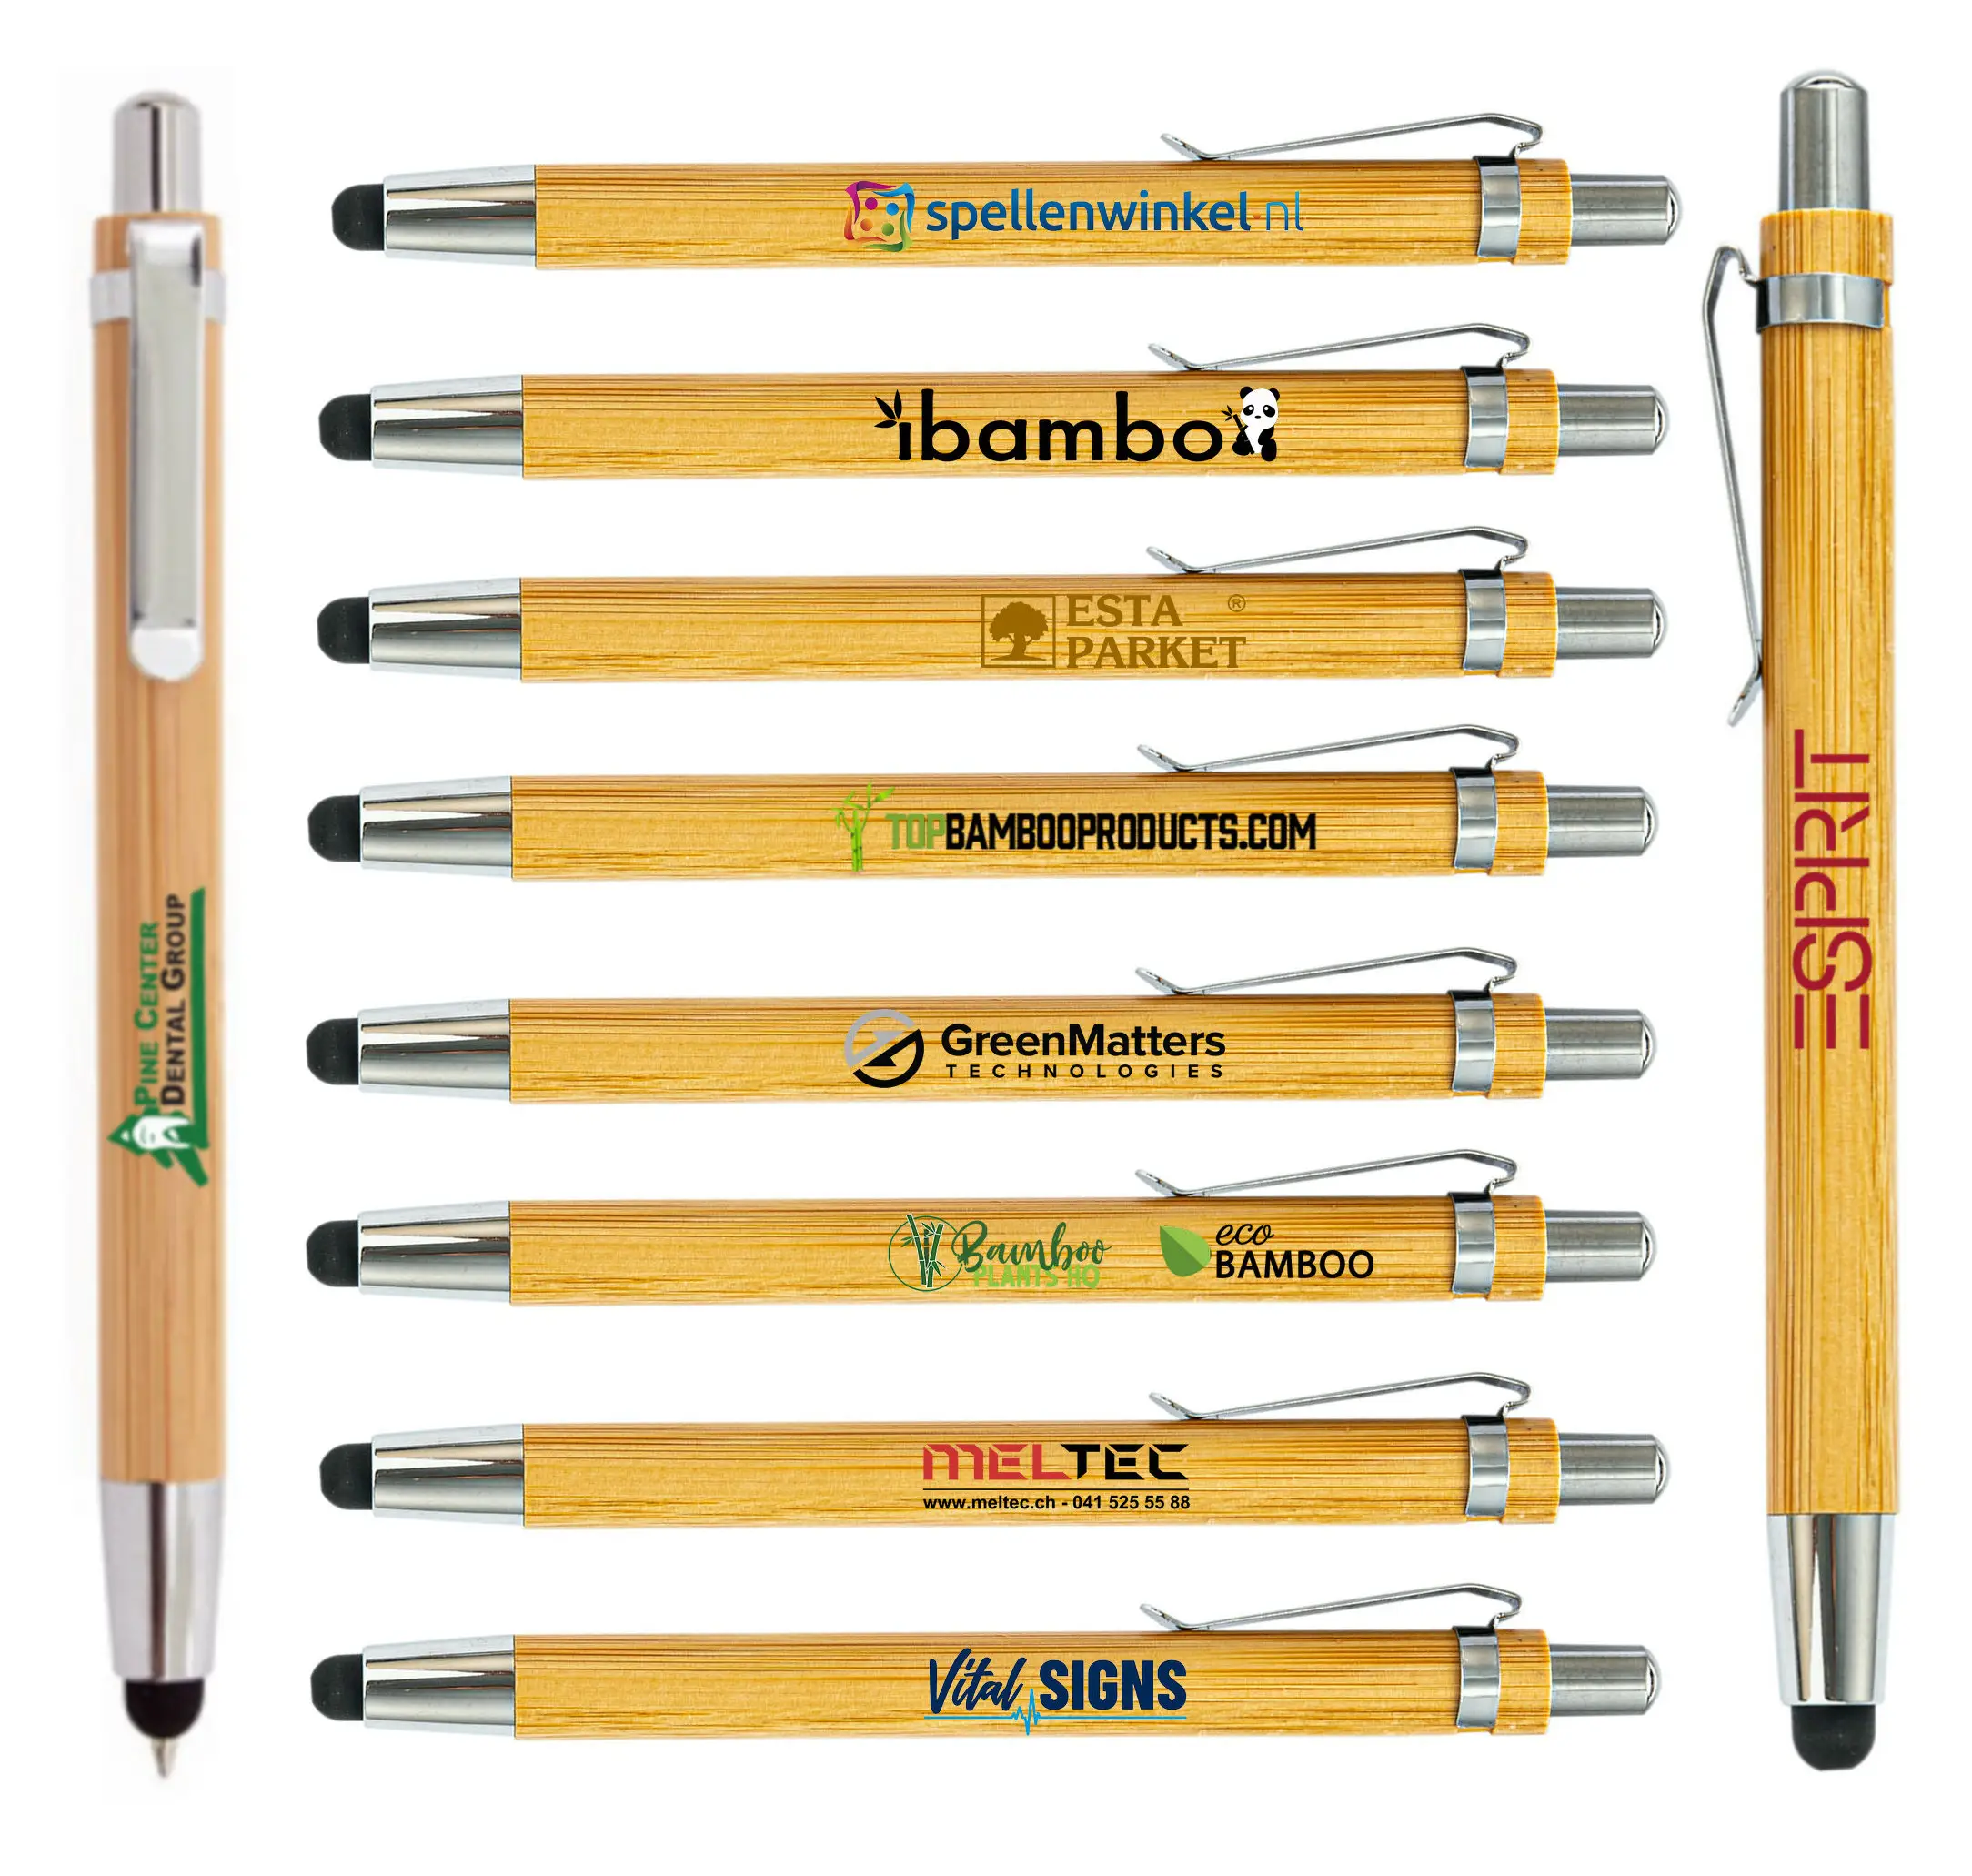 Most Popular Customer Laser Logo Eco-Friendly Bamboo Stylus wood Ballpoint Pen with Touch screen stylus